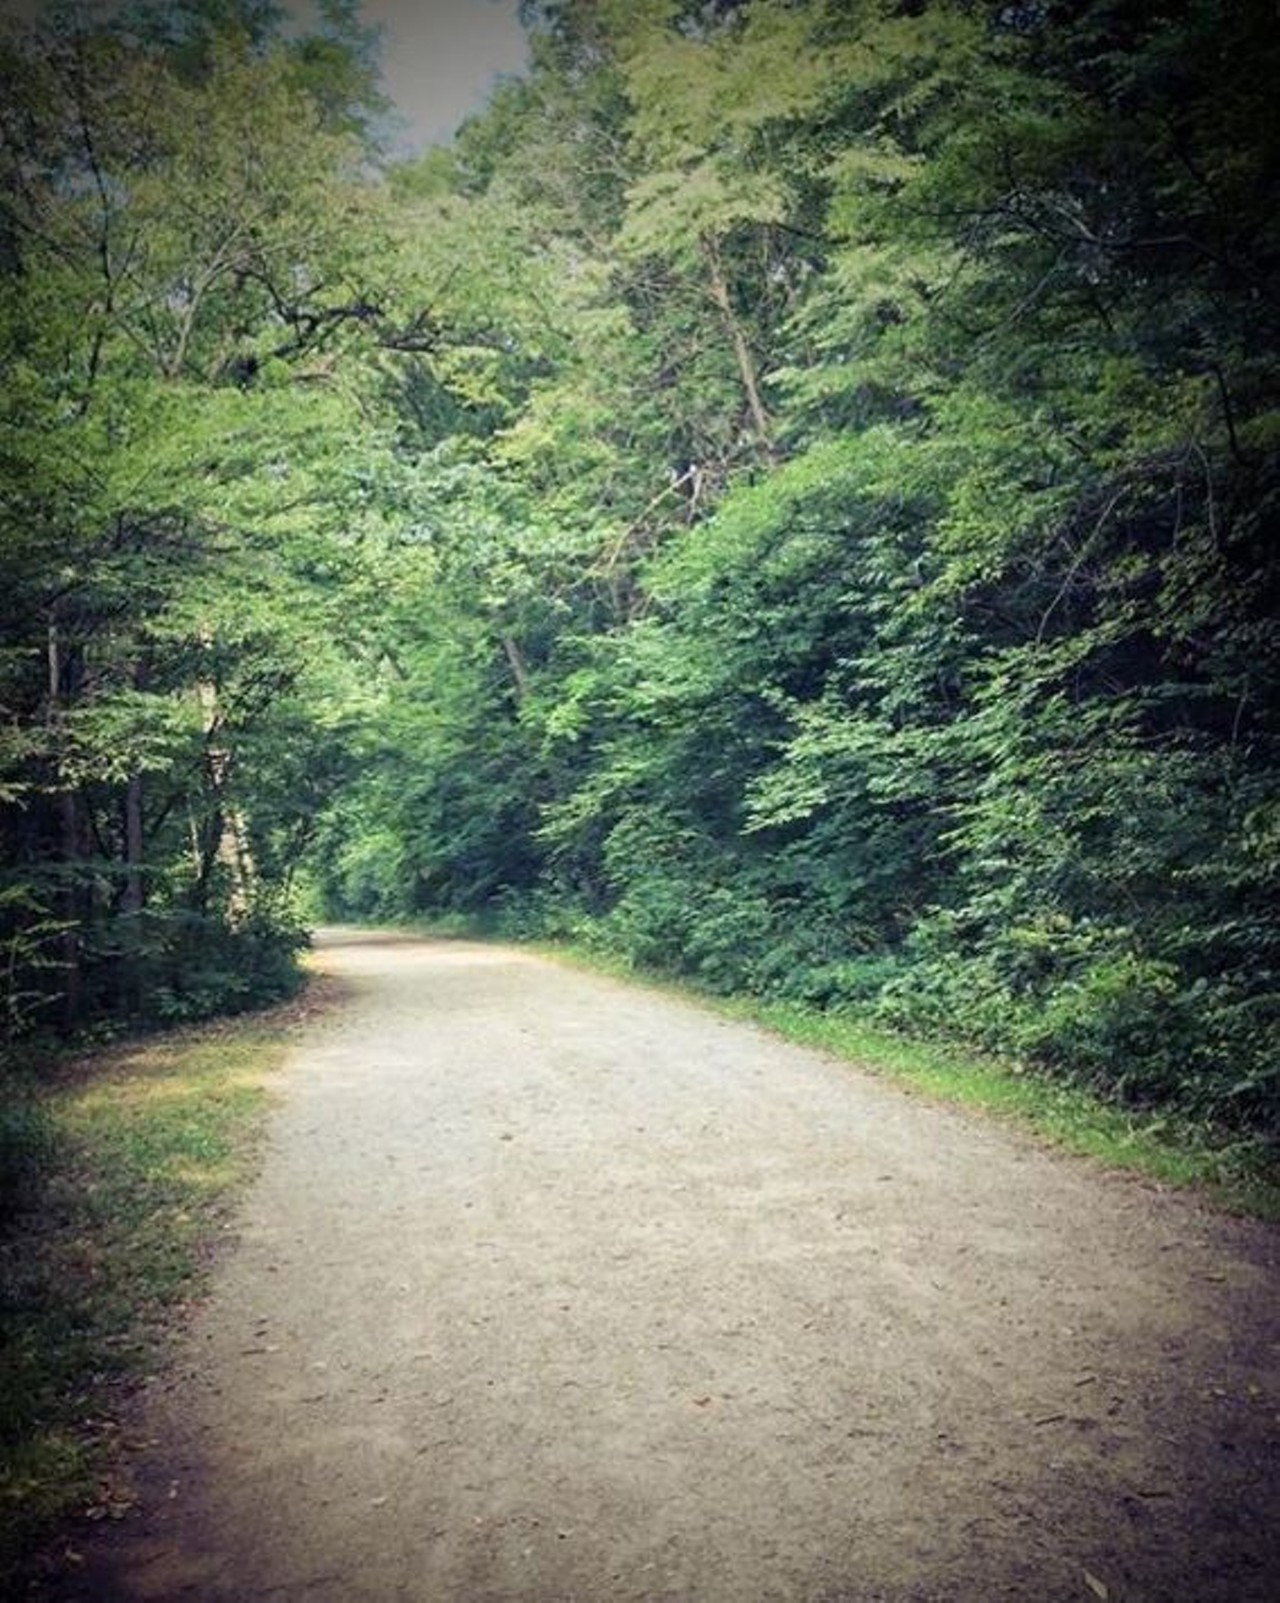 Nichols Arboretum Trails
Ann Arbor
There are two trails at Nichols Arboretum, both of which offer their own experience. The first is the informative Clean Water Trail, which passes by the Huron River and has signs detailing how water gets polluted and how it is prevented at the Arboretum. The Laurel Ridge Trail is populated by beautiful and carefully-preserved flowers, shrubs, and trees.
Photo via Instagram user @nvg_pix